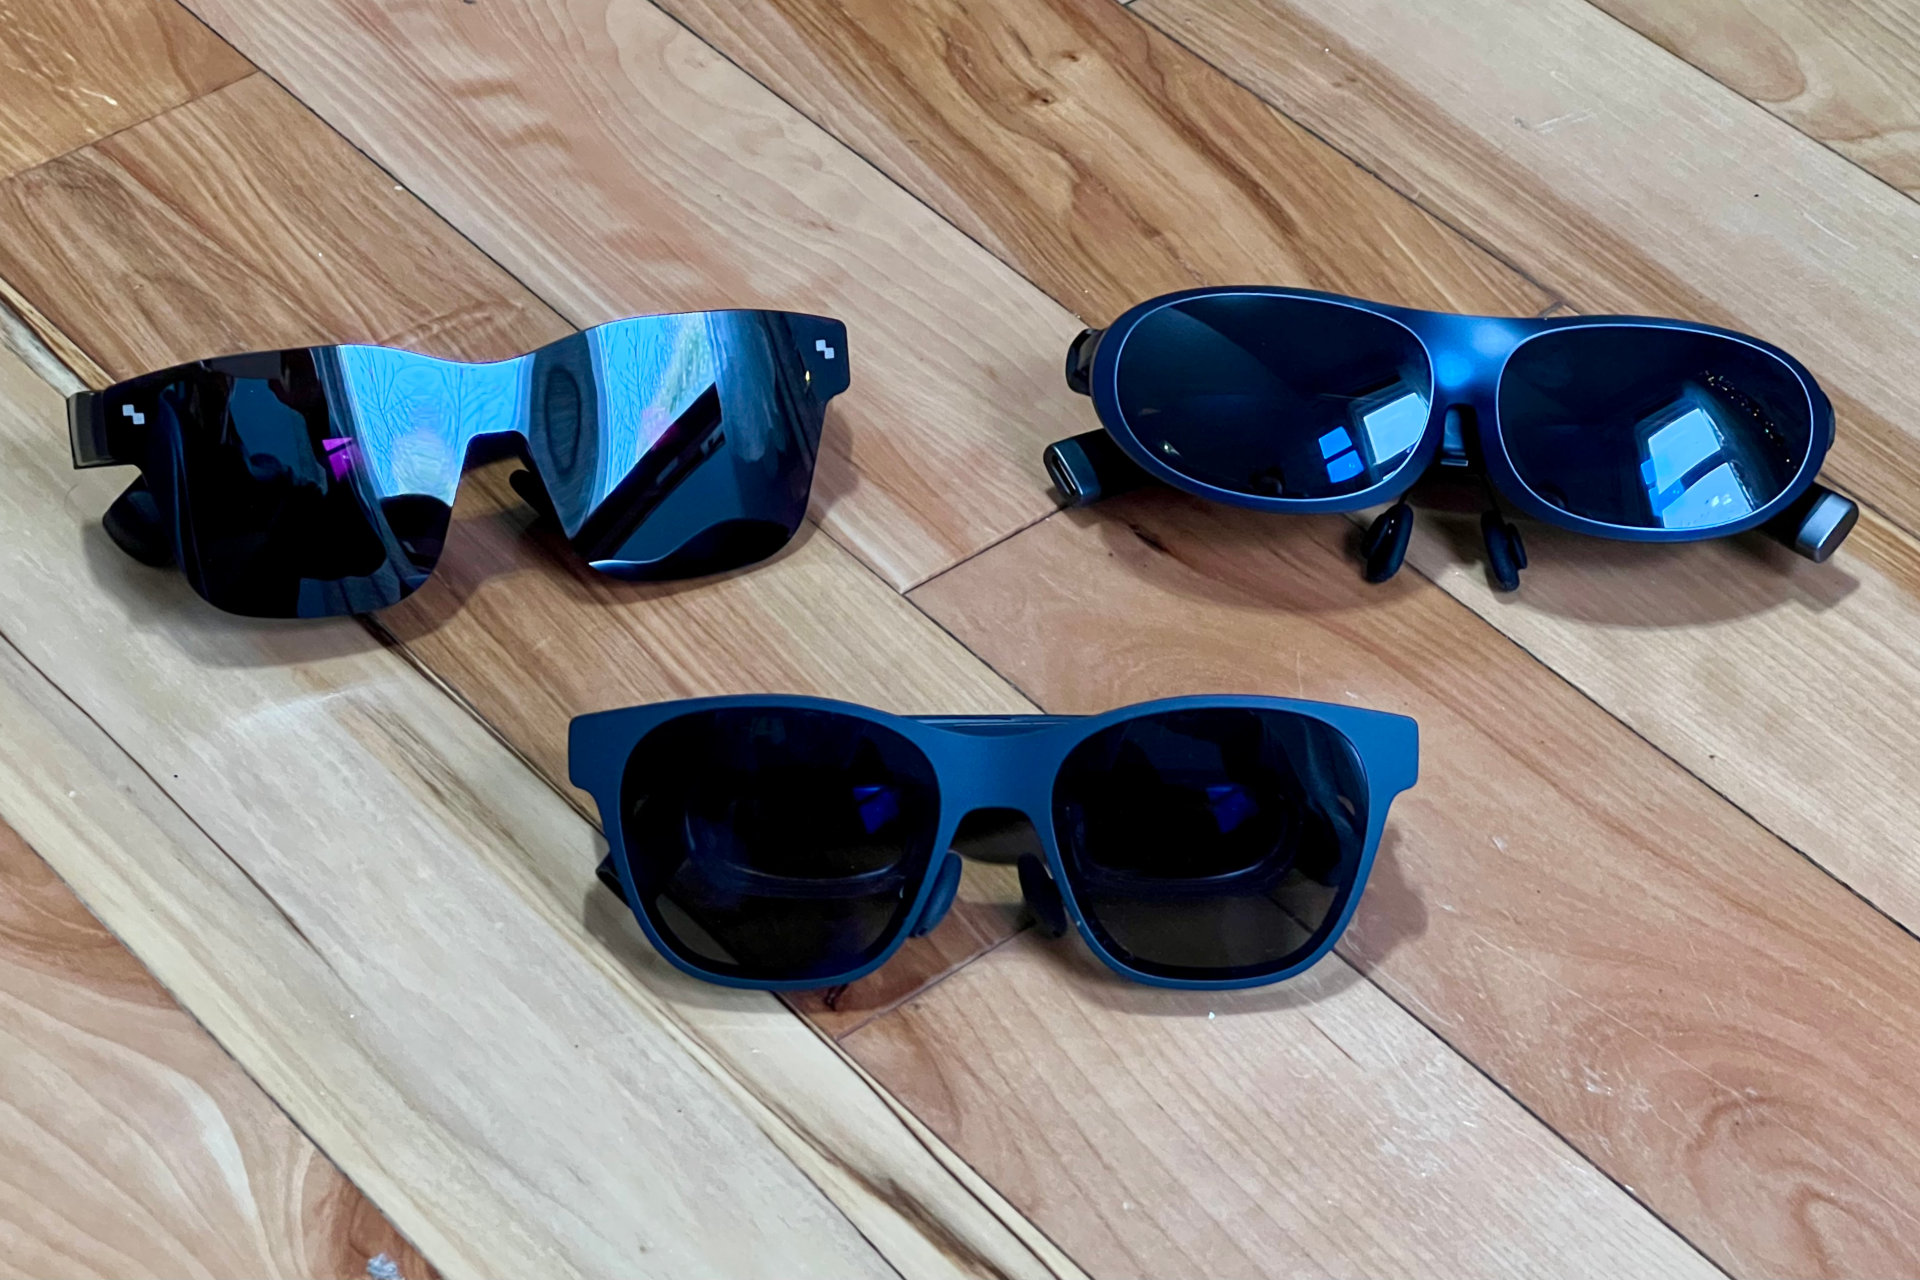 XREAL Air AR glasses and XREAL Beam review -  news